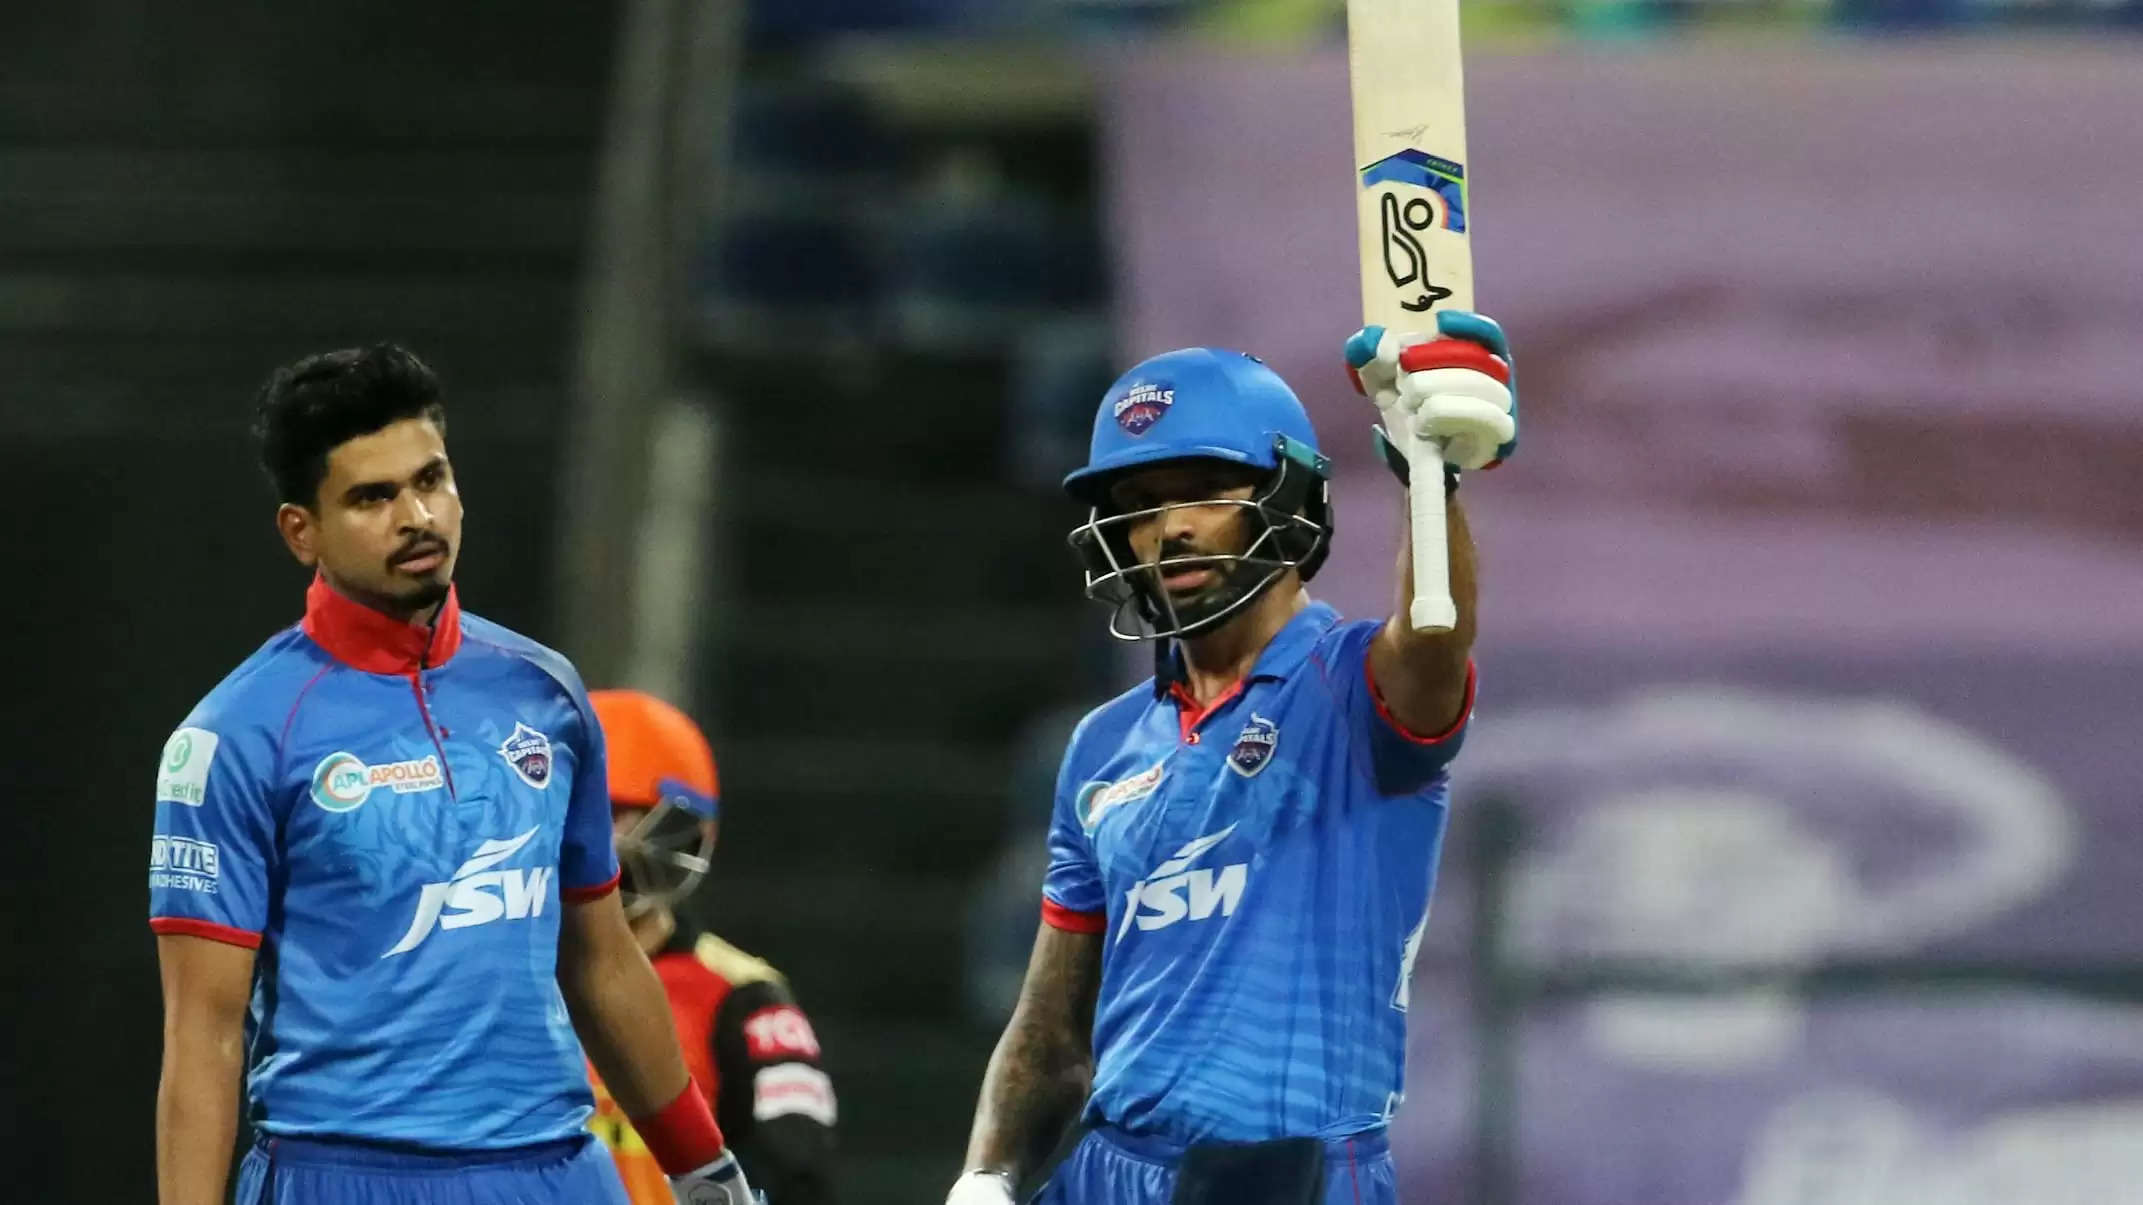 IPL 2021: 5 Players who can win the Orange Cap | Most Runs in IPL 2021